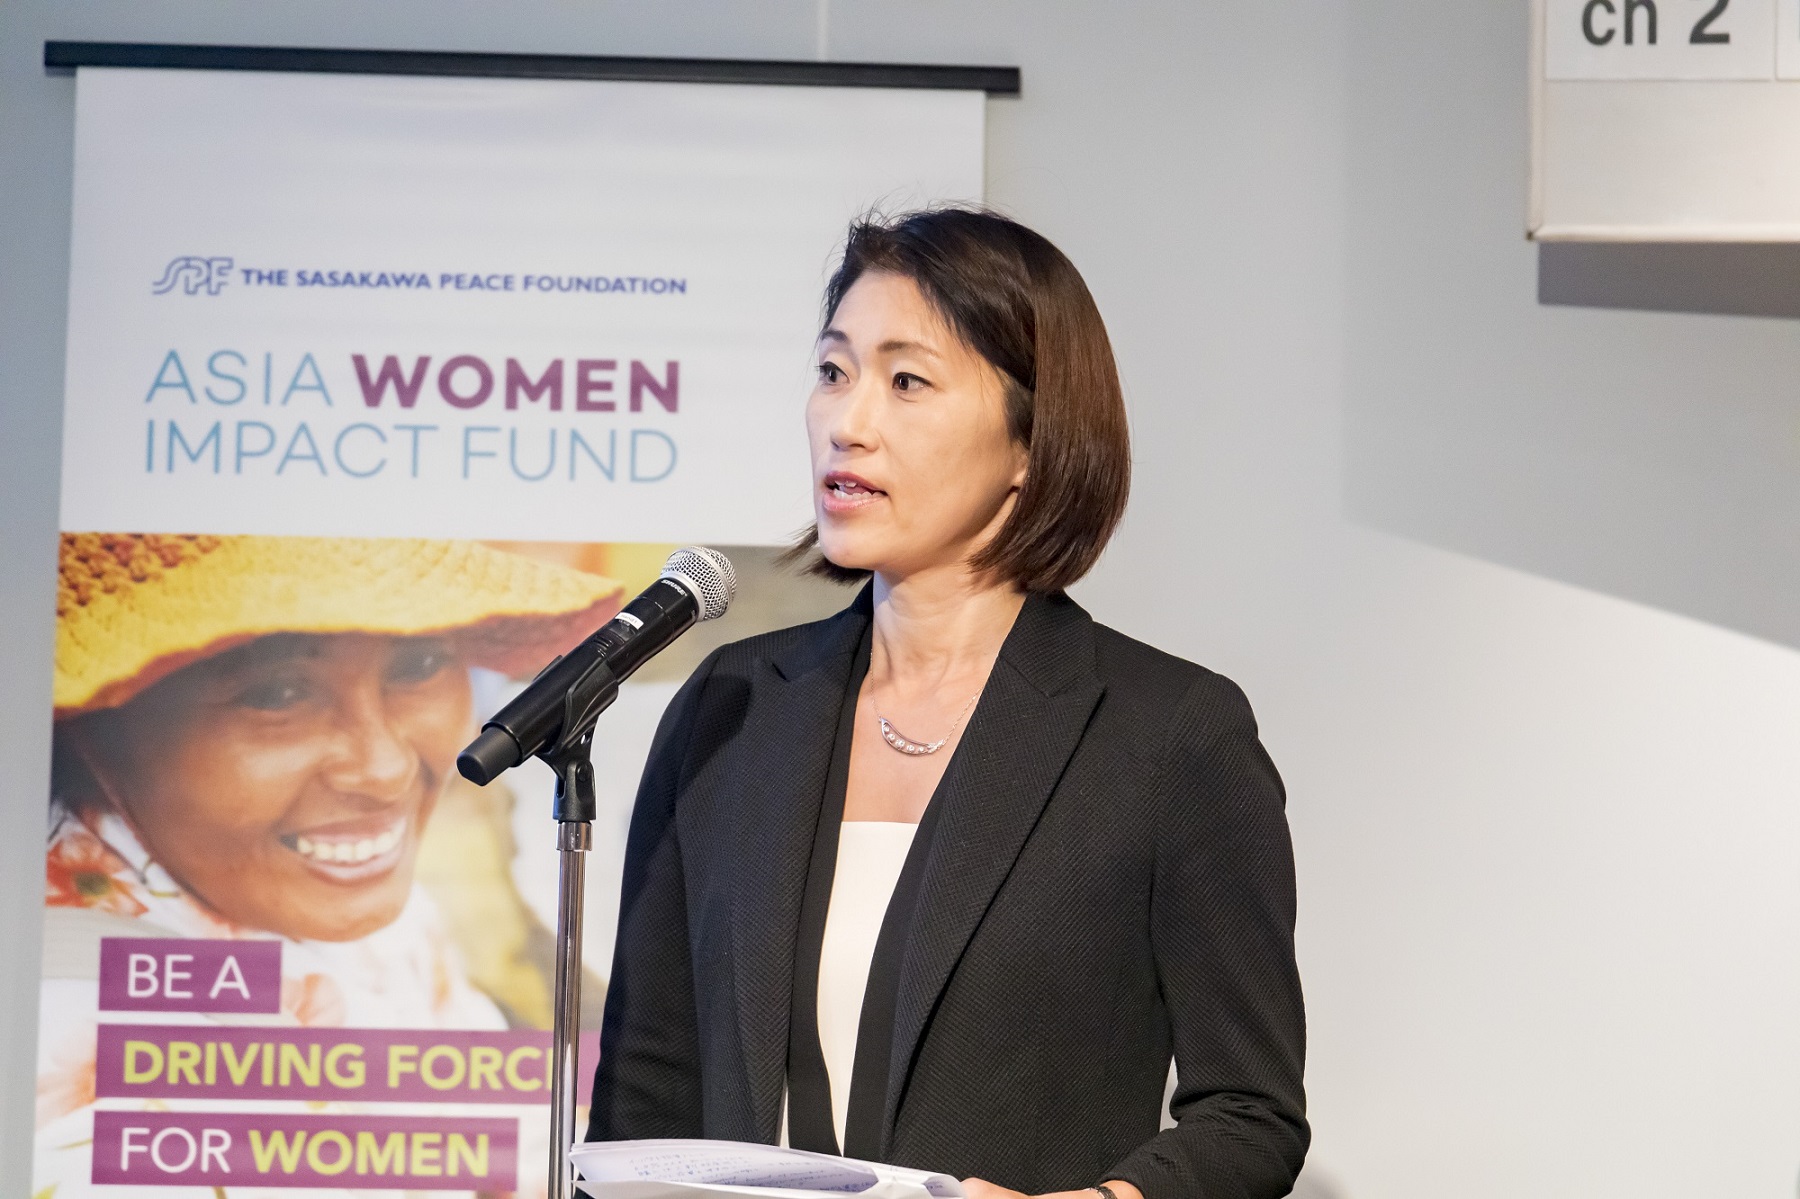 Ms. Ayaka Matsuno, Director of SPF's Gender Investment and Innovation Department